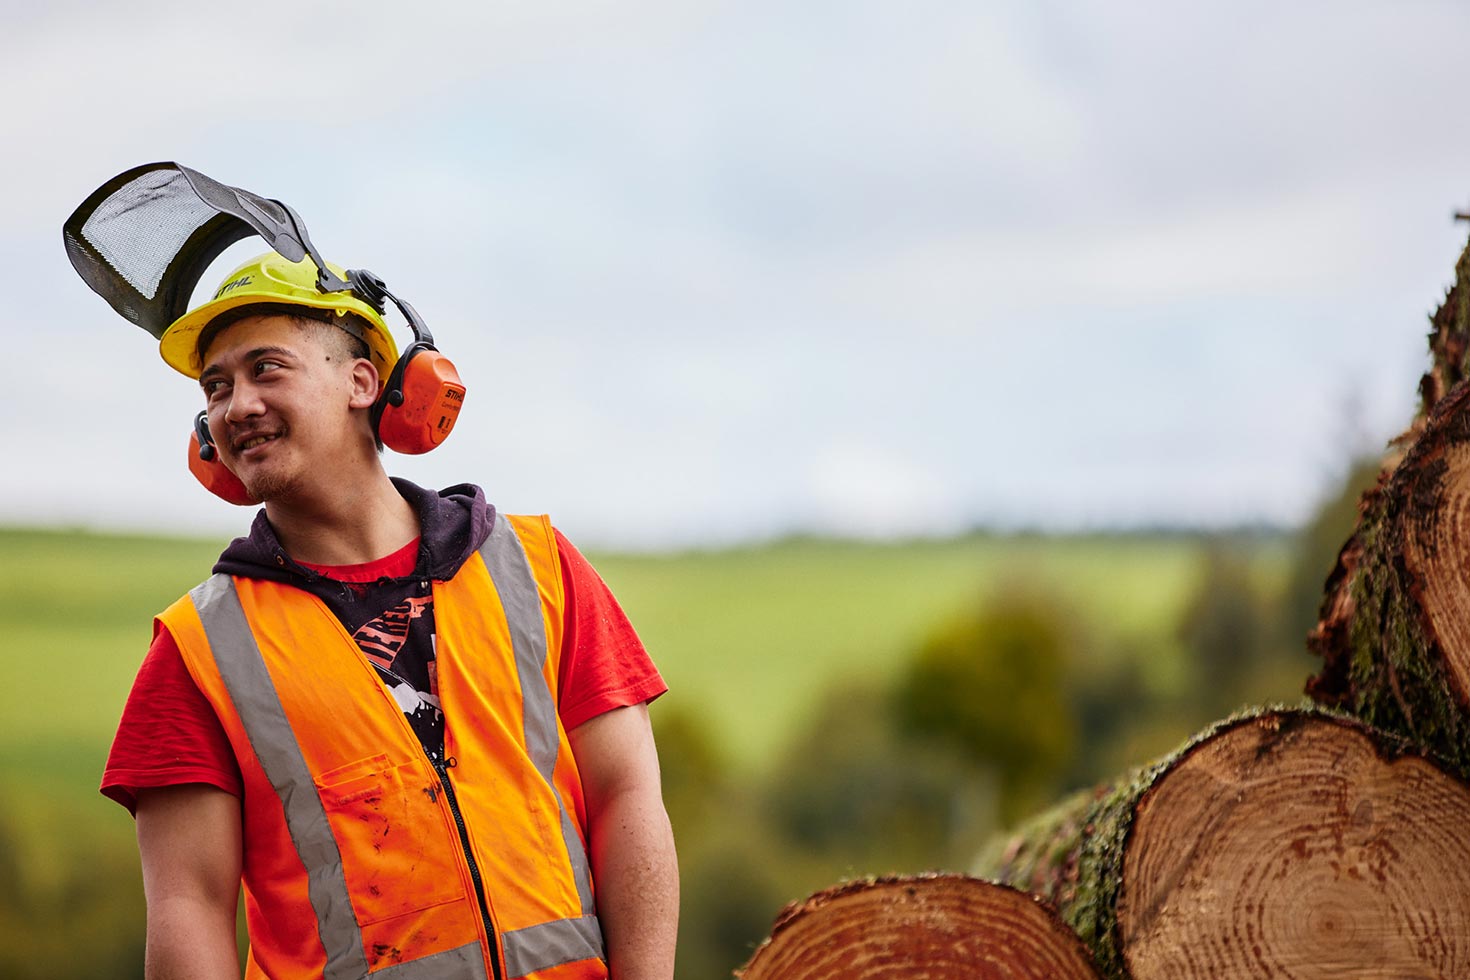 Forestry Worker 2 Column 1470x980px